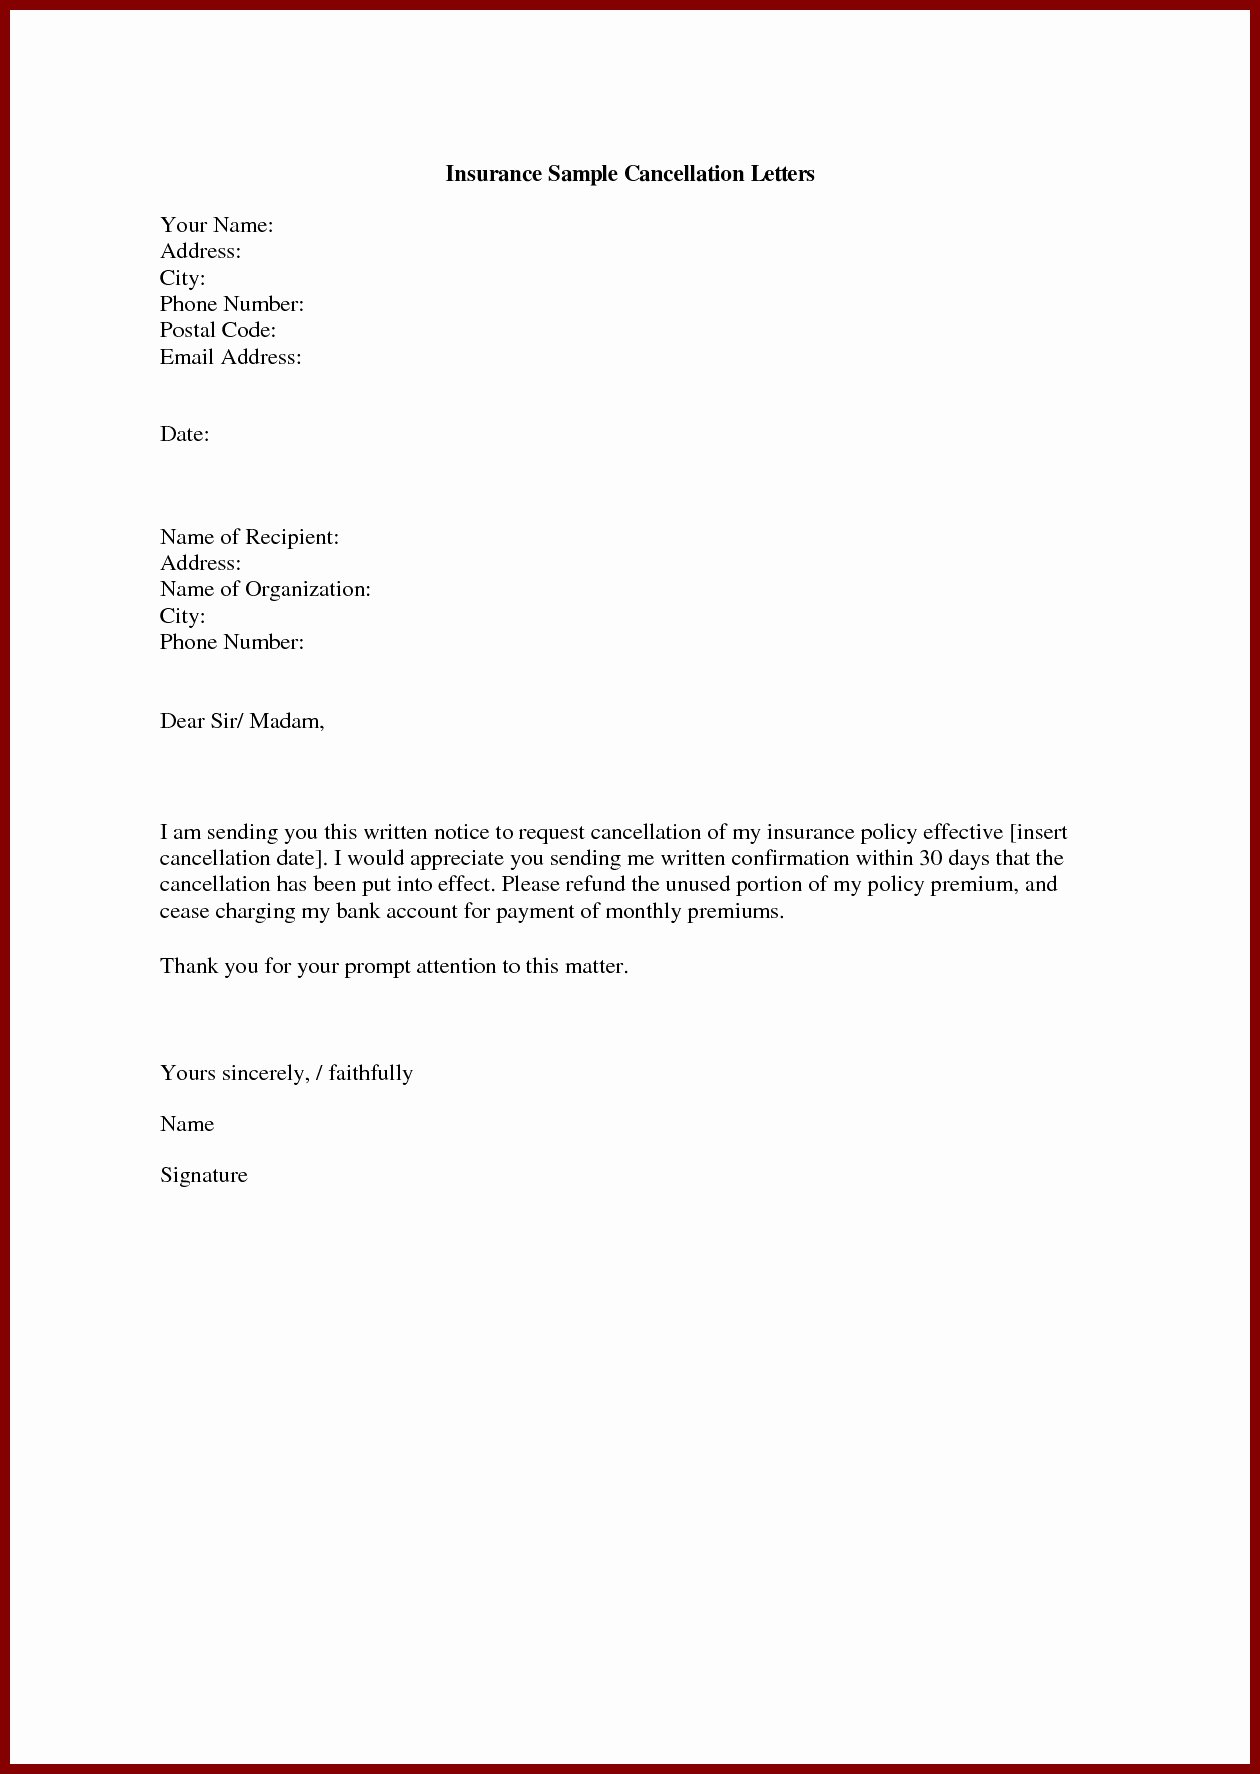 Policy Letter Template Beautiful Insurance Policy Cancellation Letter Template Sample